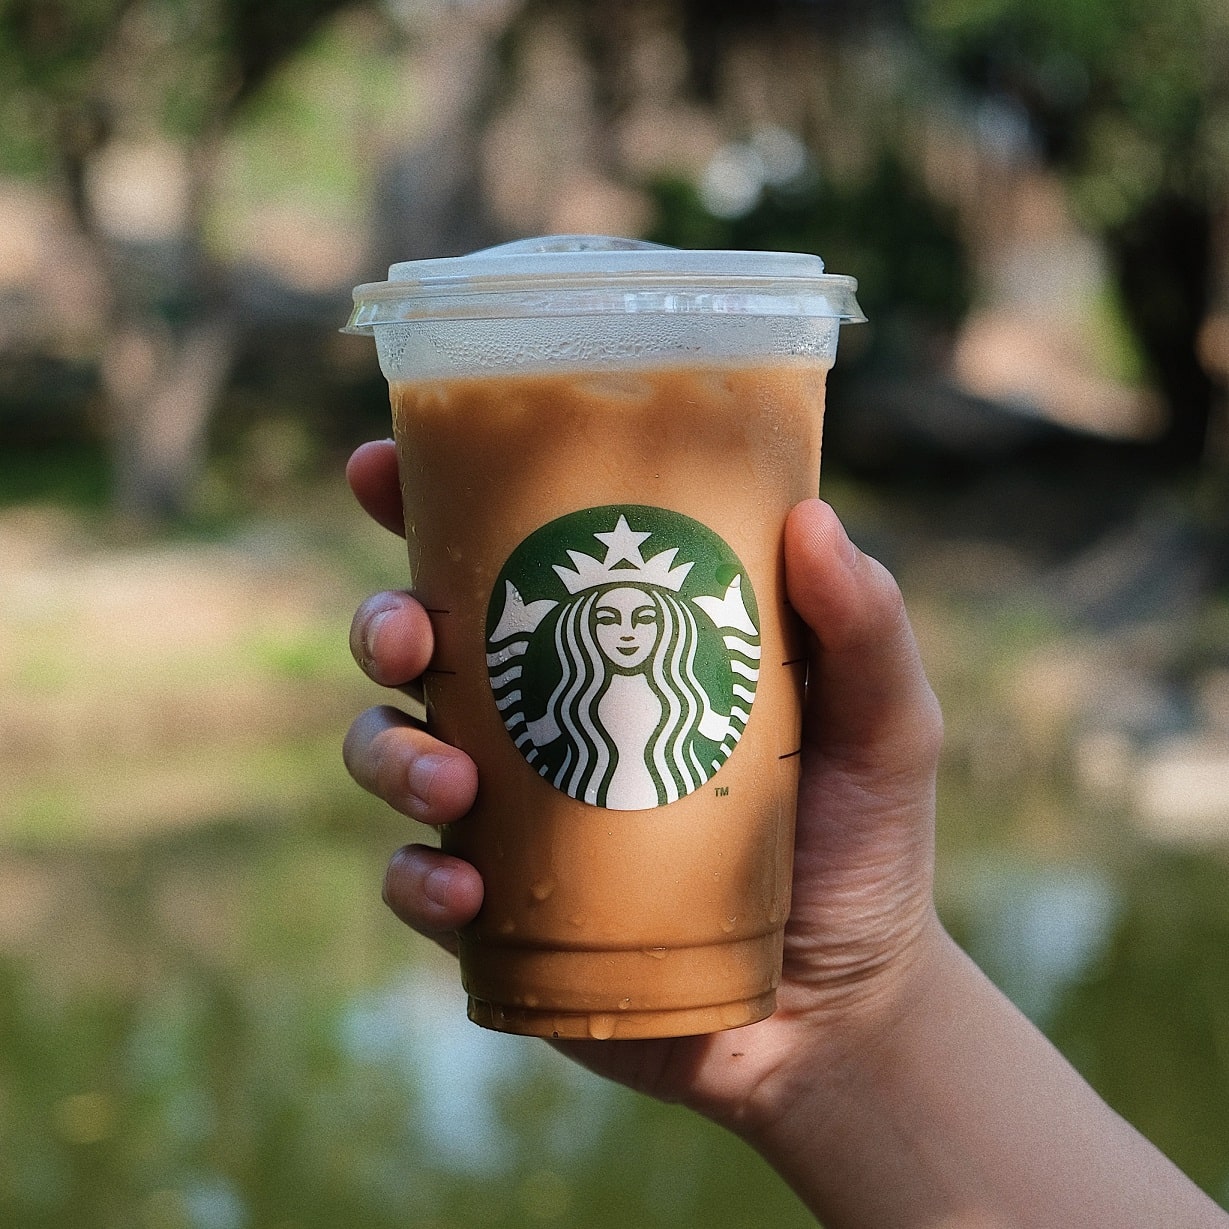 Have you tried the authentic Starbucks iced coffee?